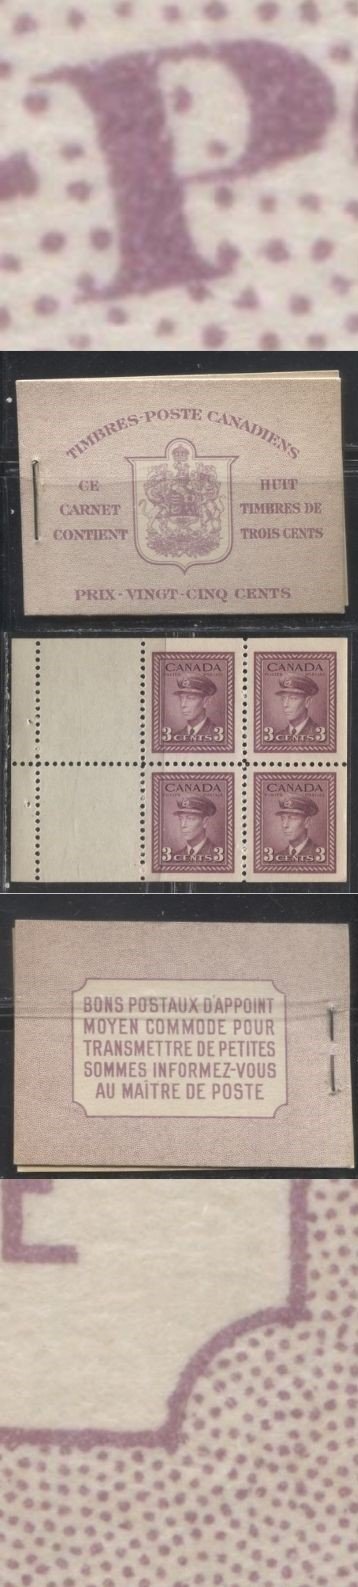 Lot 266 Canada #BK35b 1942-1949 War Issue, Complete 25¢ French Booklet, 2 Panes of 3c Rosy Plum, Smooth Vertical Wove Paper, Harris Front Cover Type IIn, Back Cover Type Div, 7c and 6c Airmail Rate Page